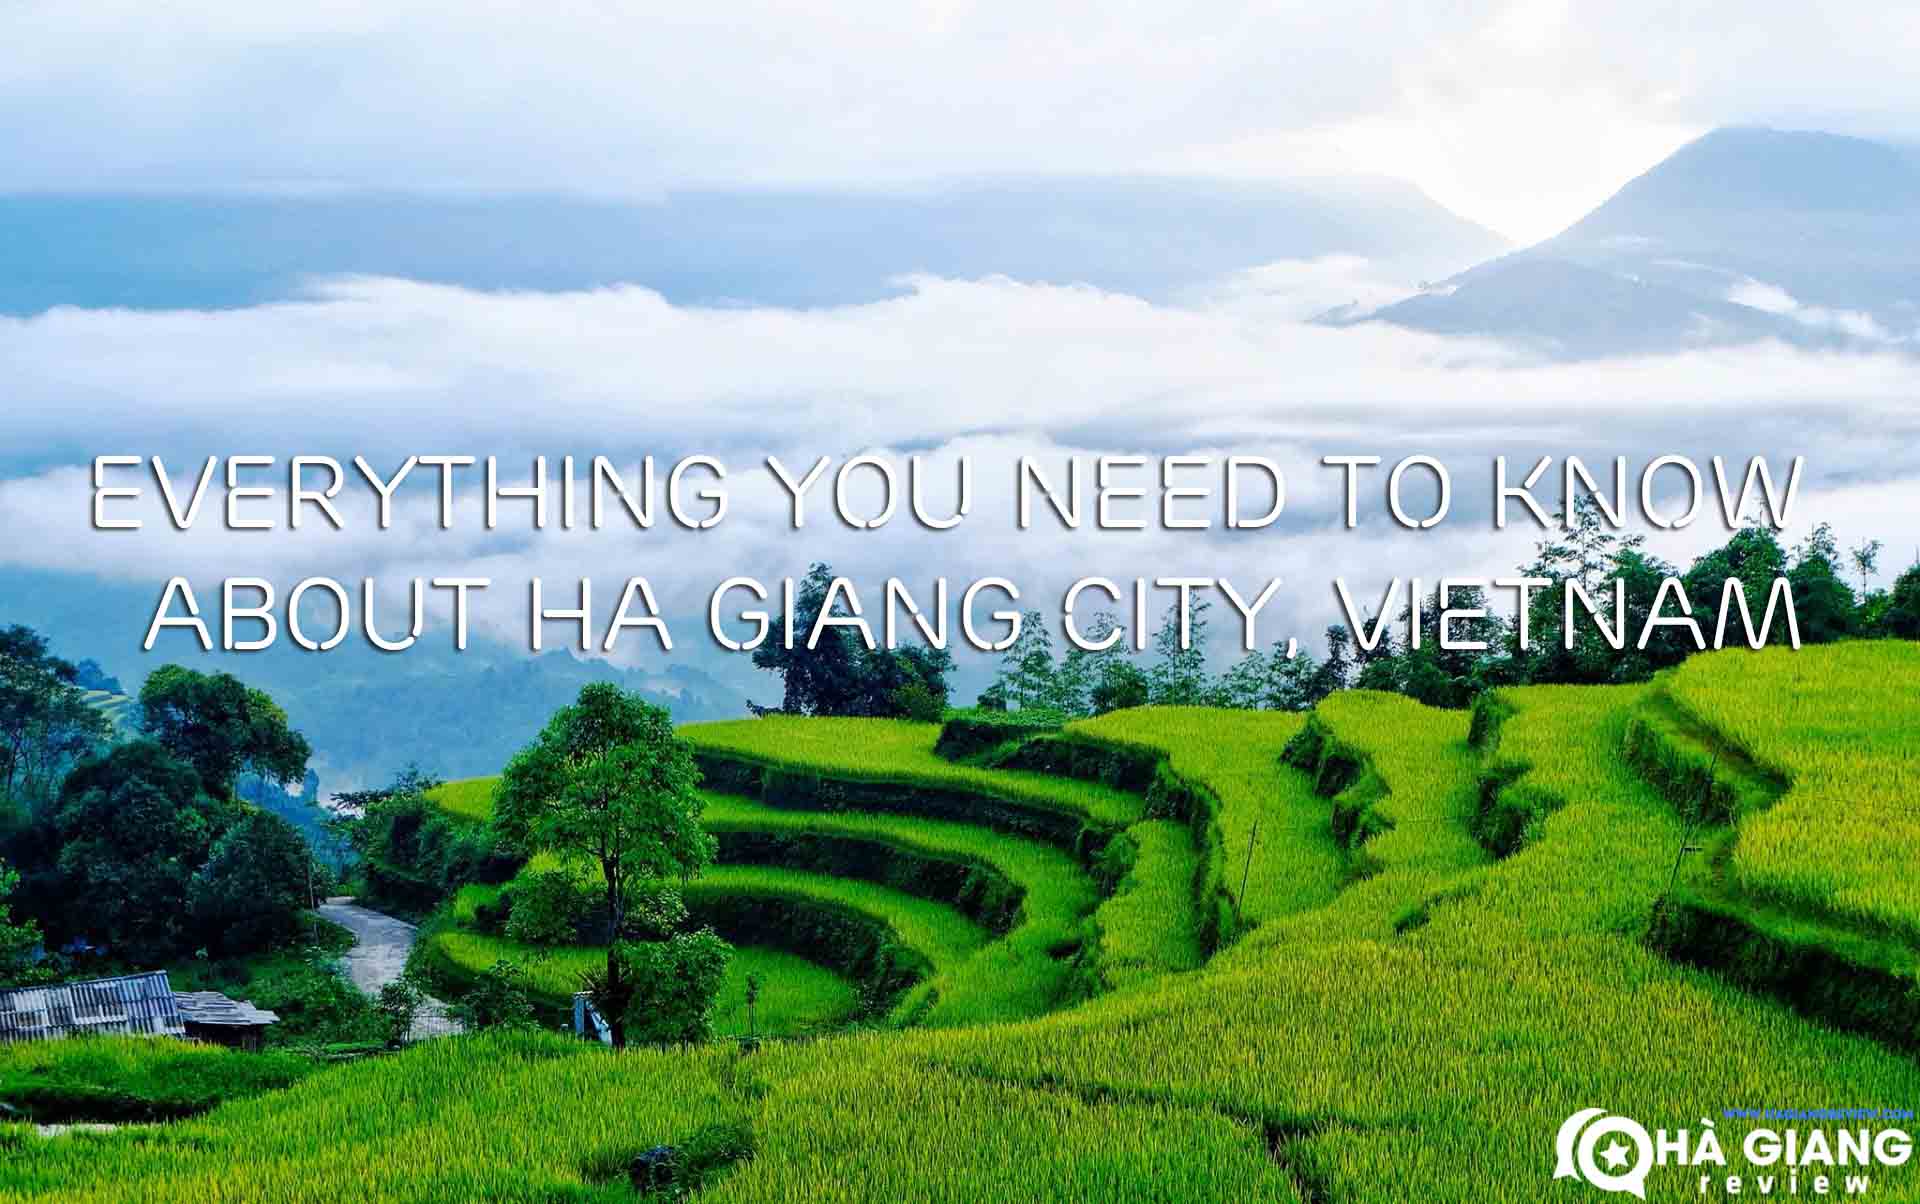 Everything You Need to Know About Ha Giang City, Vietnam